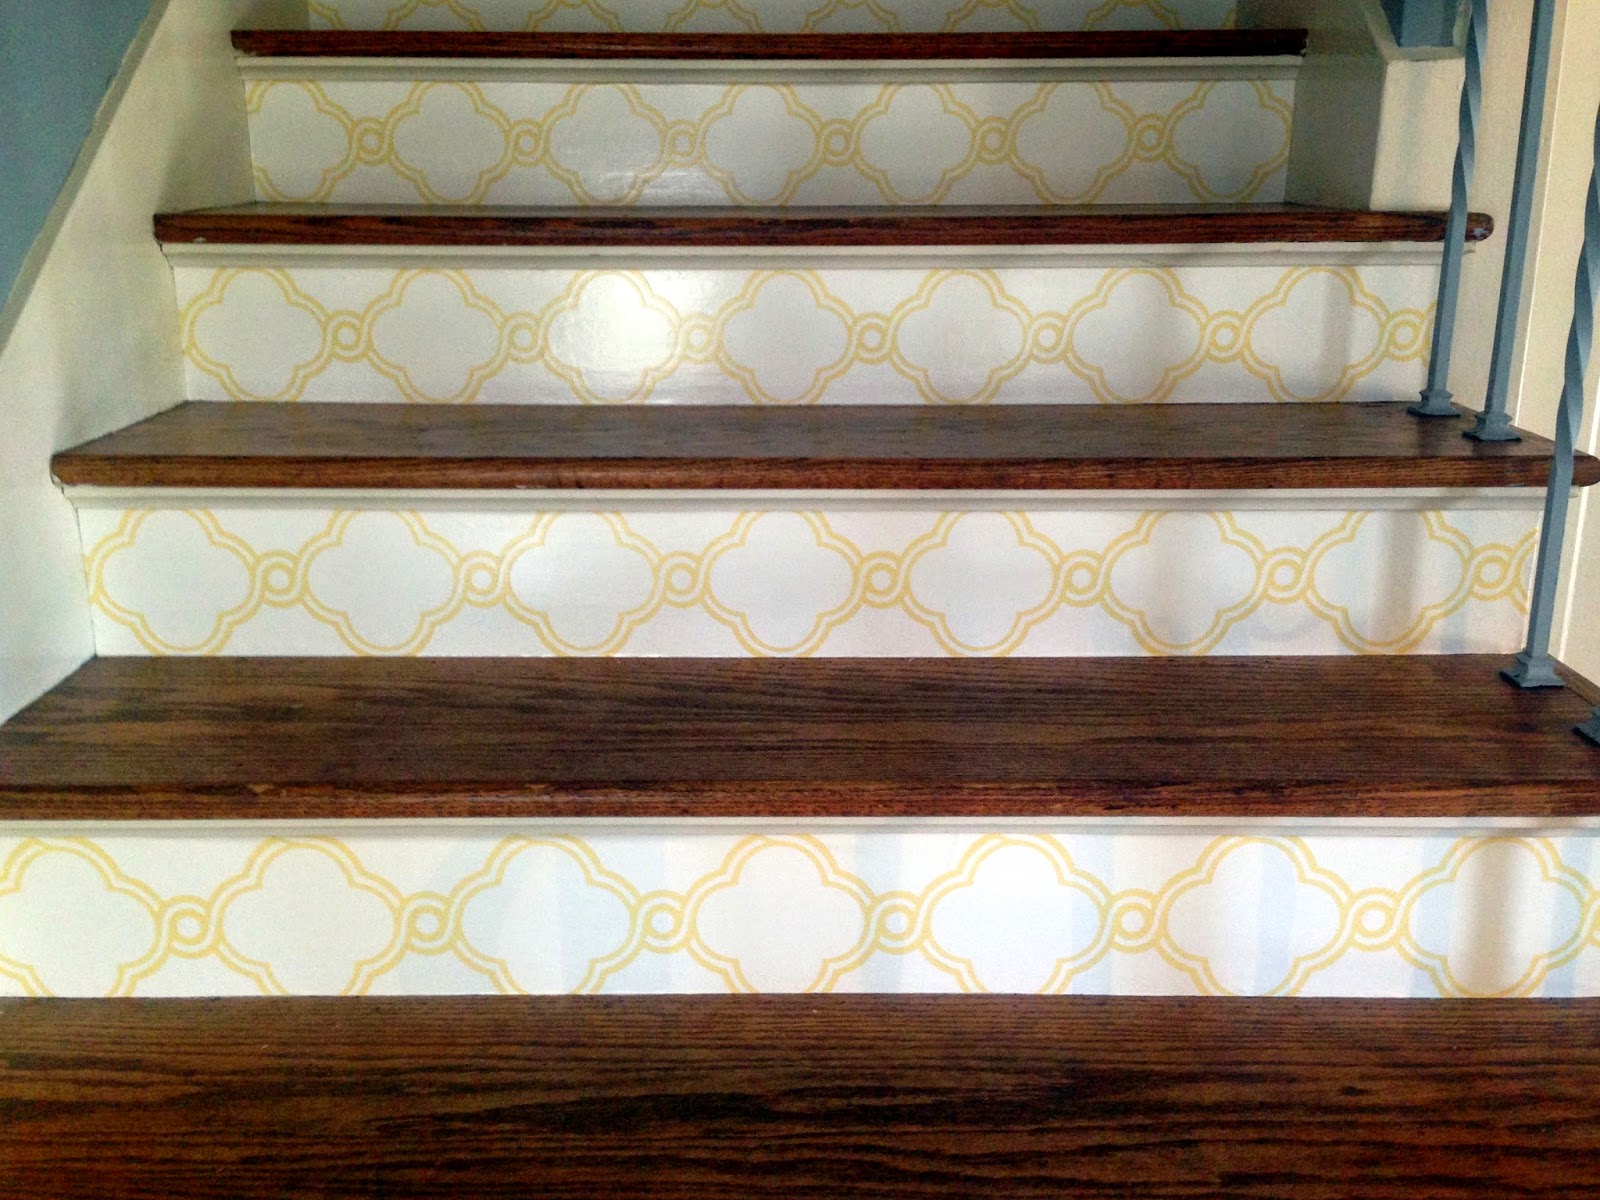 How To Wallpaper Stair Risers Barnaclebutt